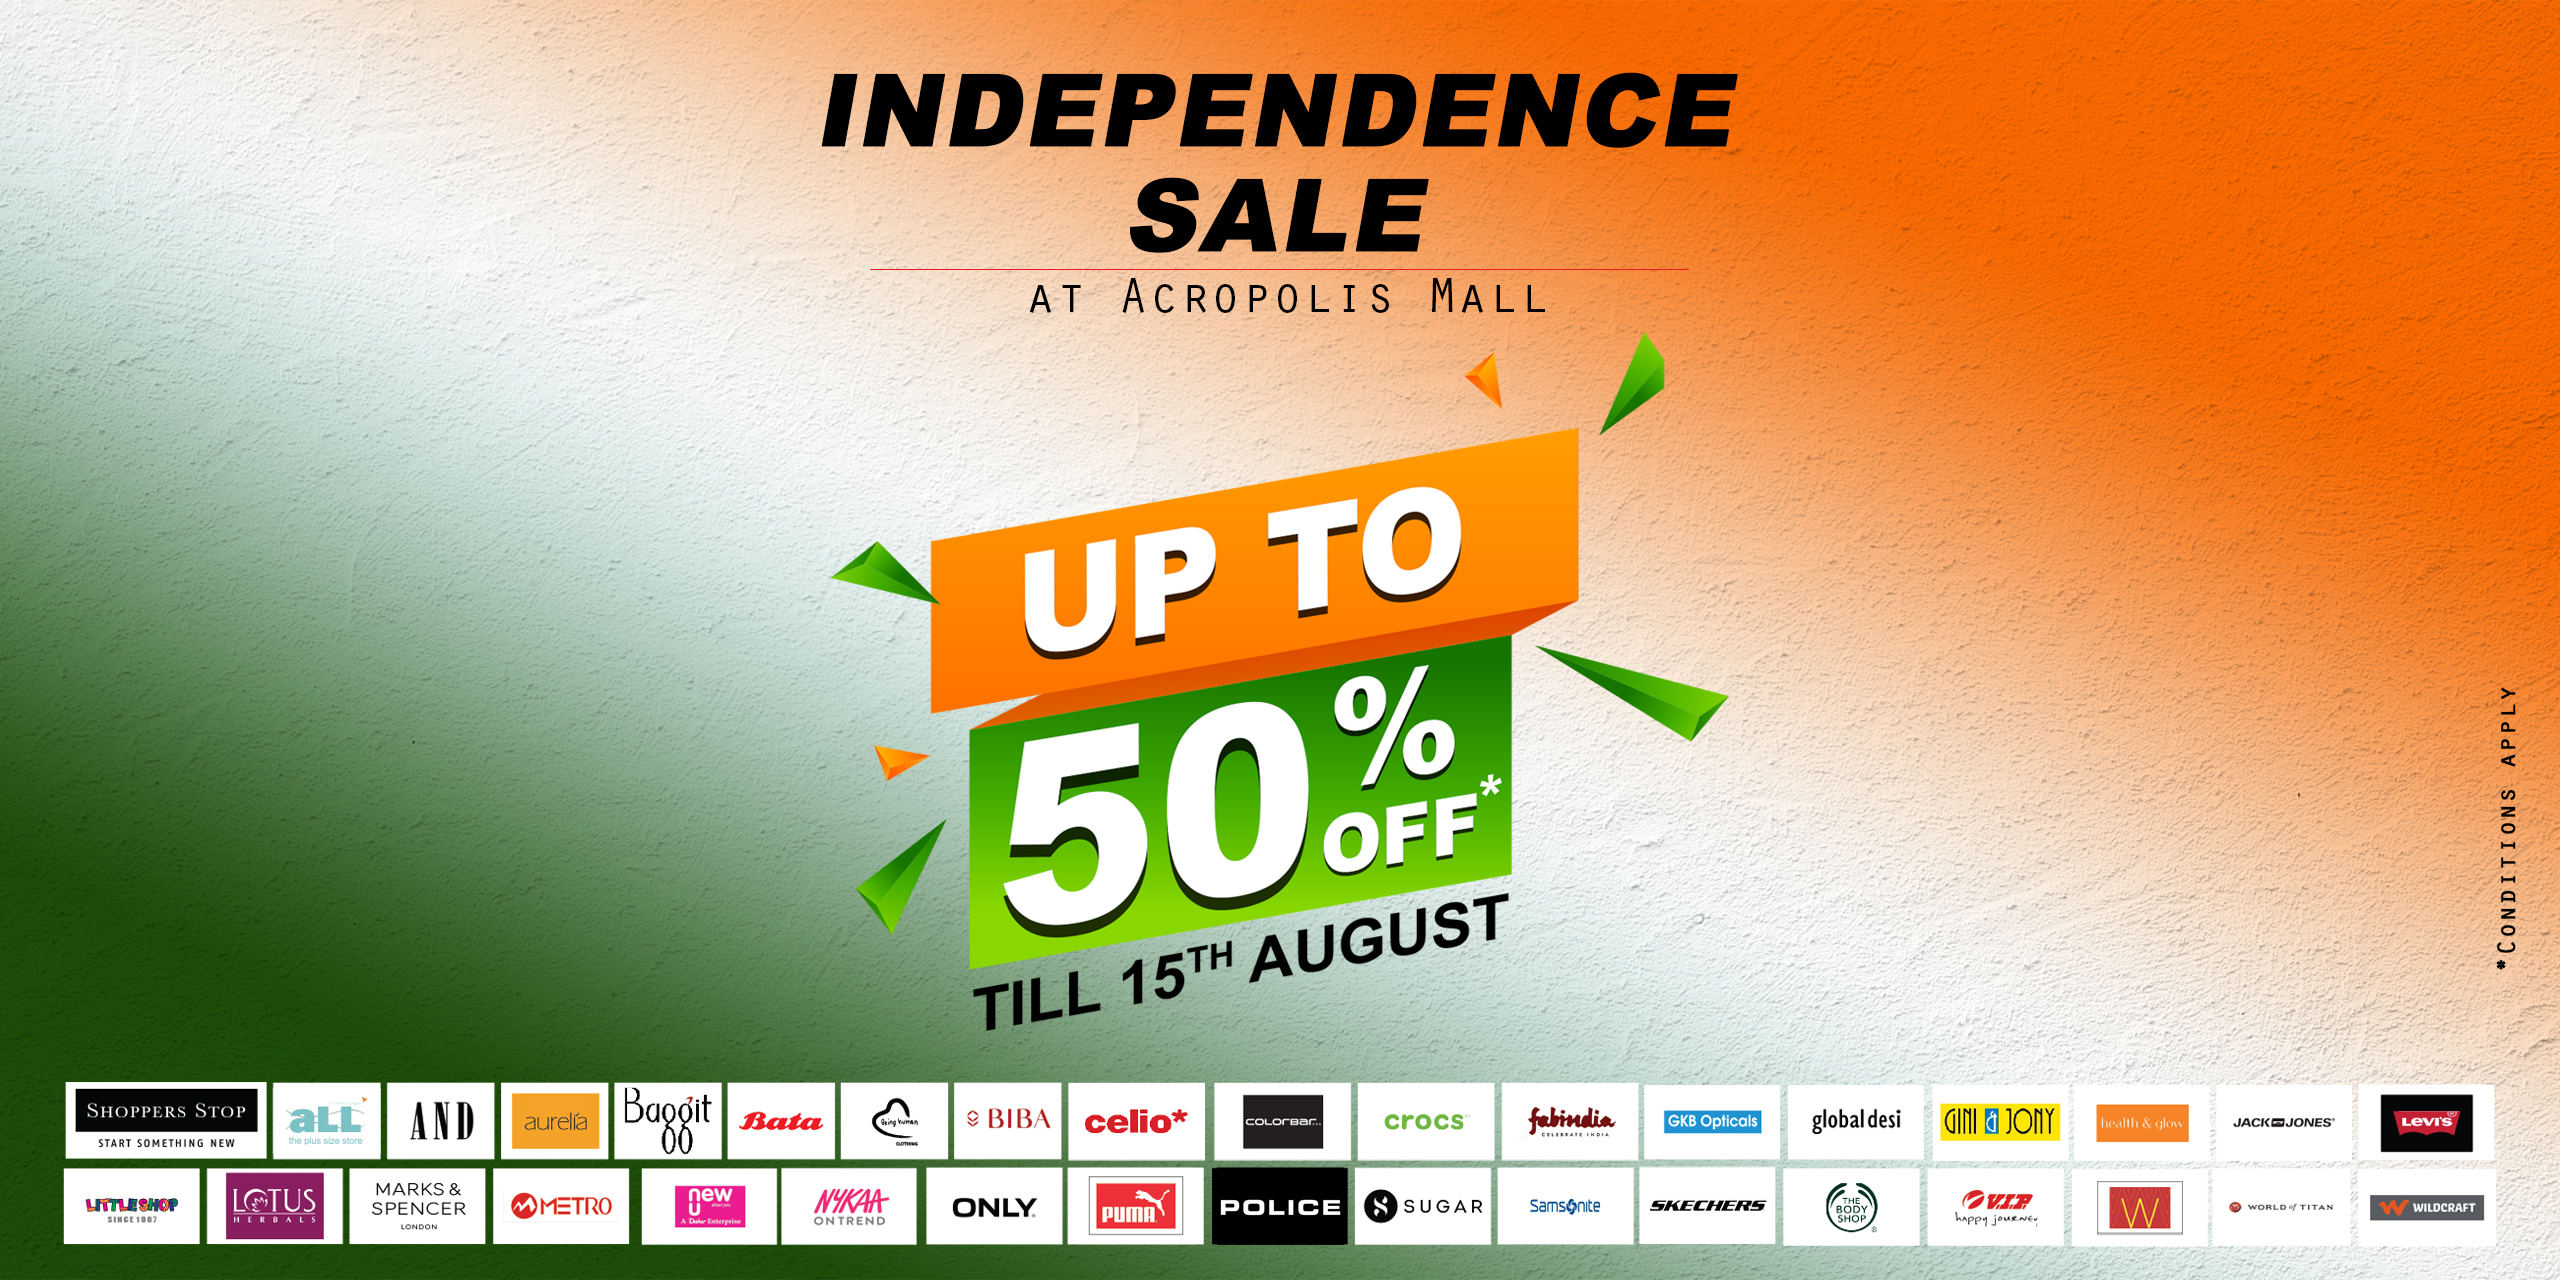 Acropolis Mall brings the End of Season Sale to you – Brands are raining discounts for you to grab